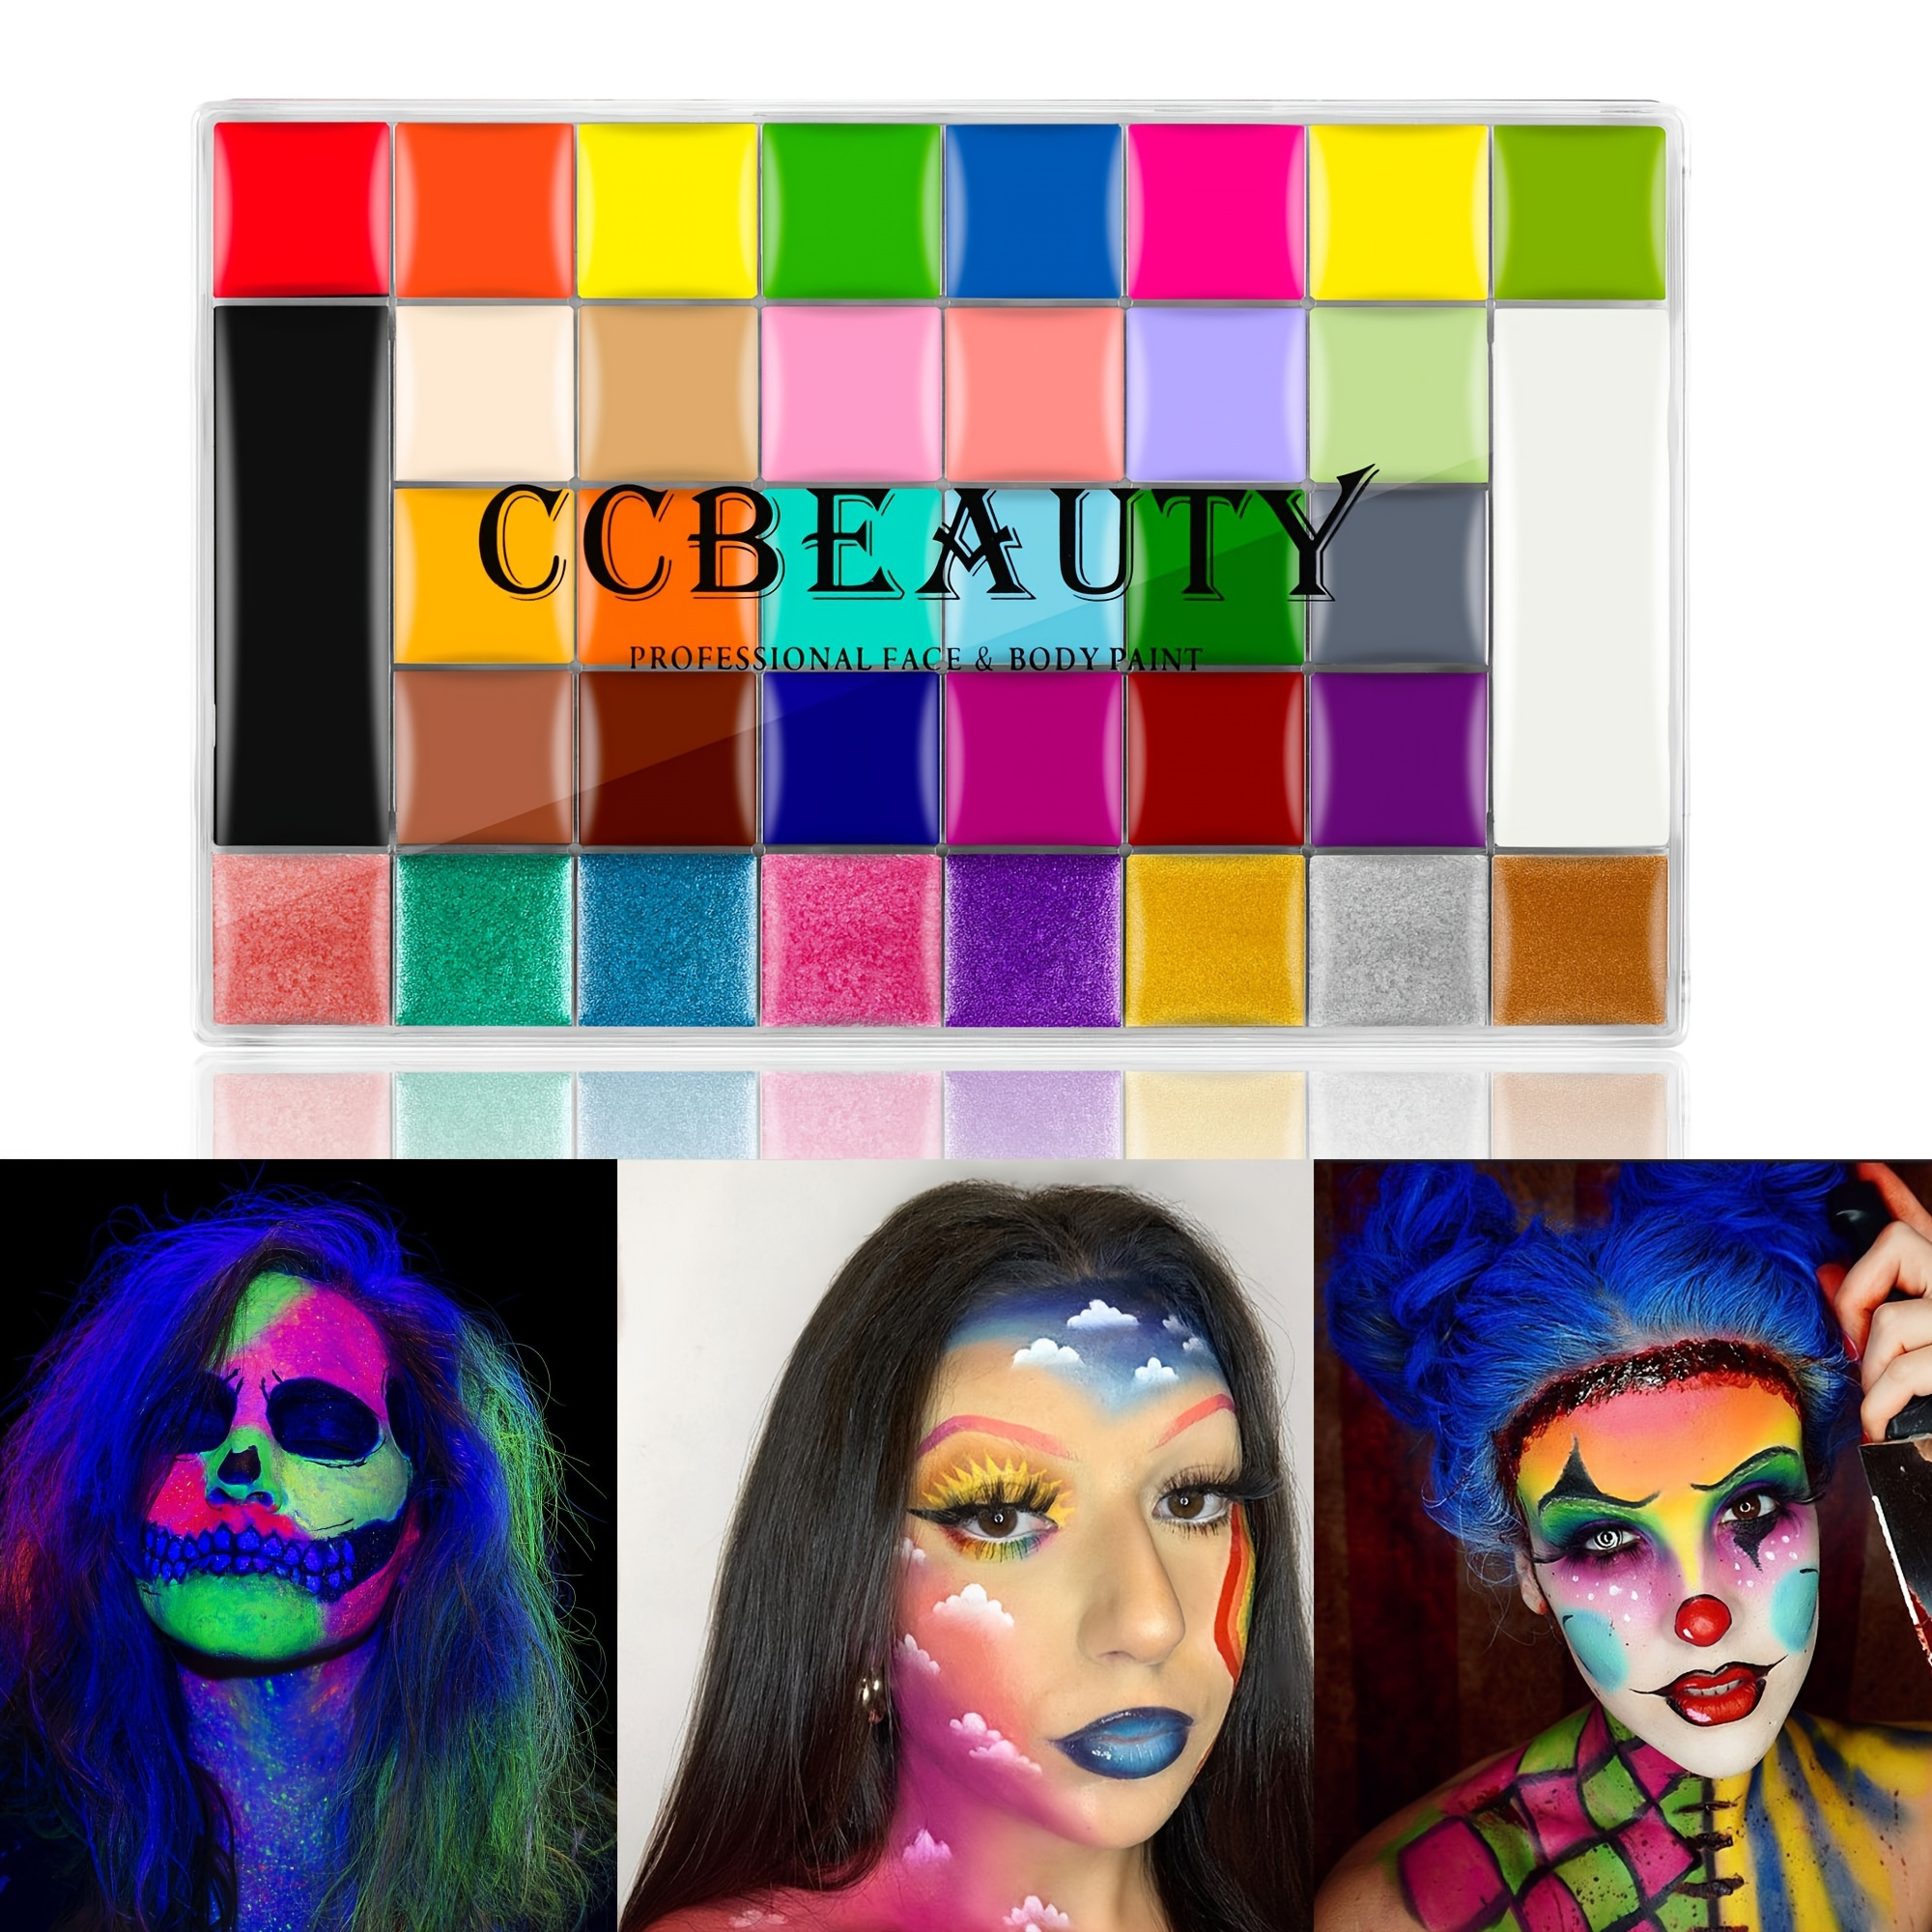  CCbeauty White Black Face Paint,Professional Body